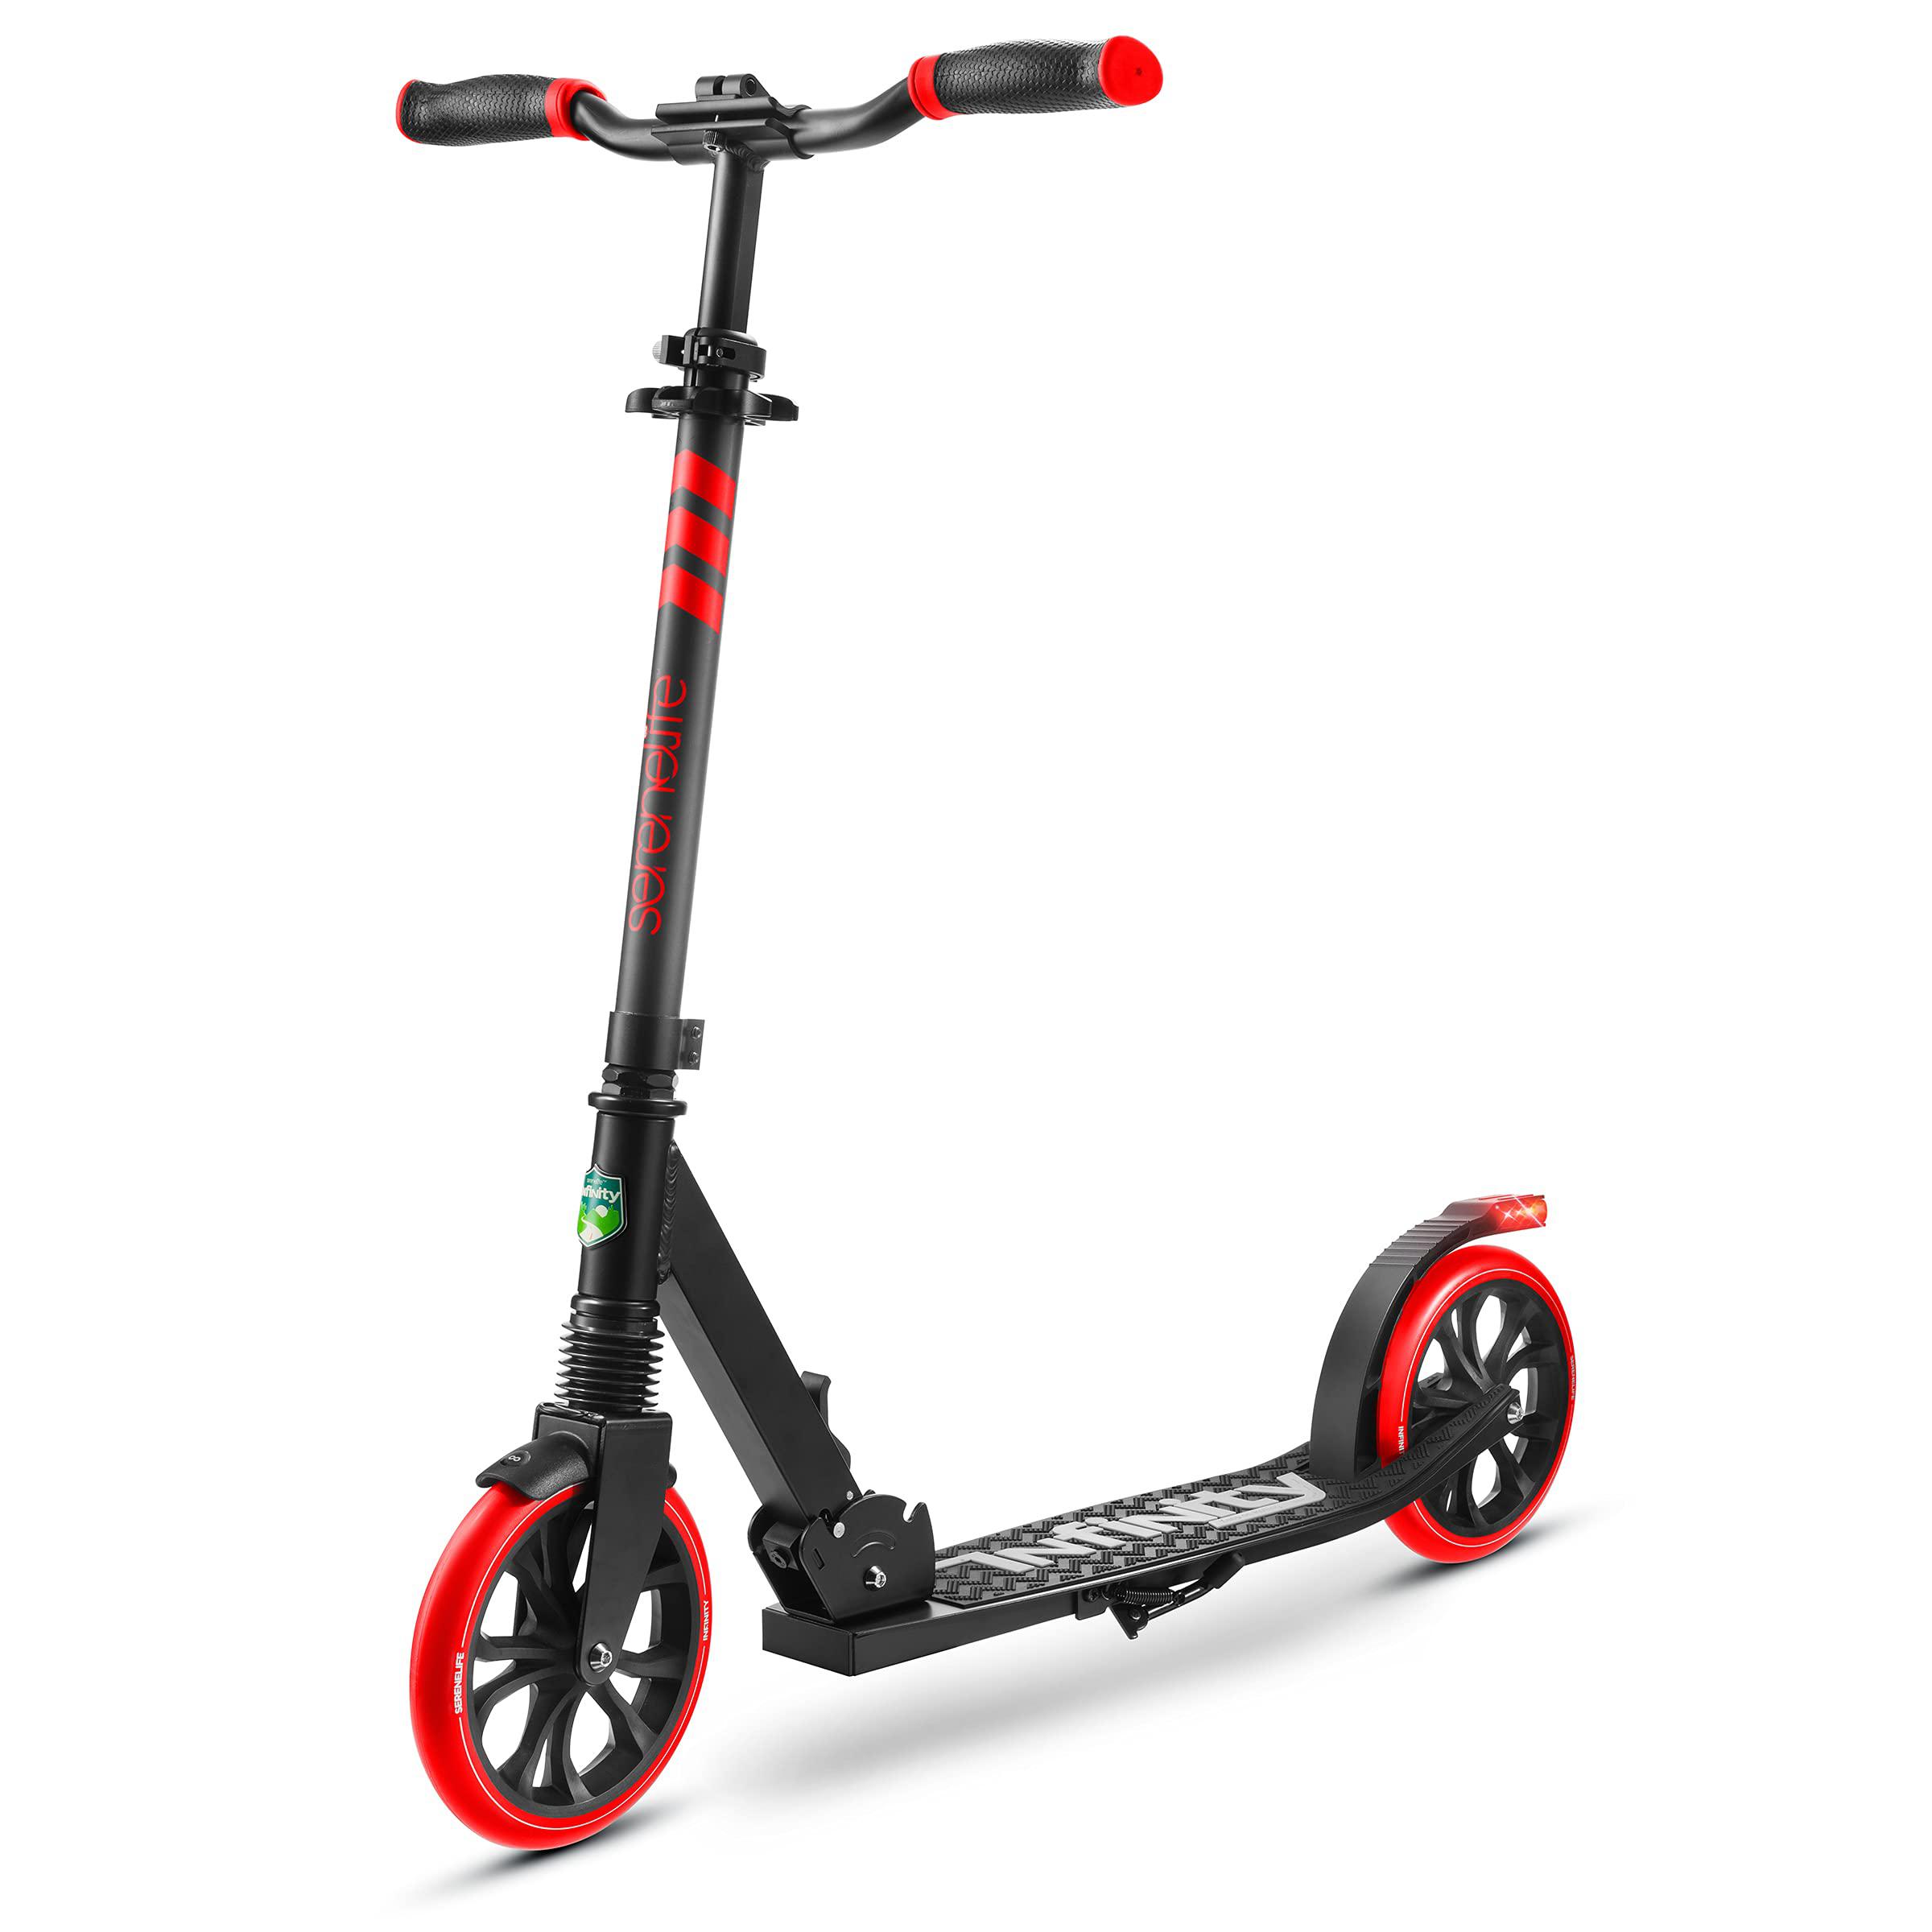 serenelife lightweight and foldable kick scooter - comfortable t-bar handlebar, adjustable scooter for teens and adult, alloy